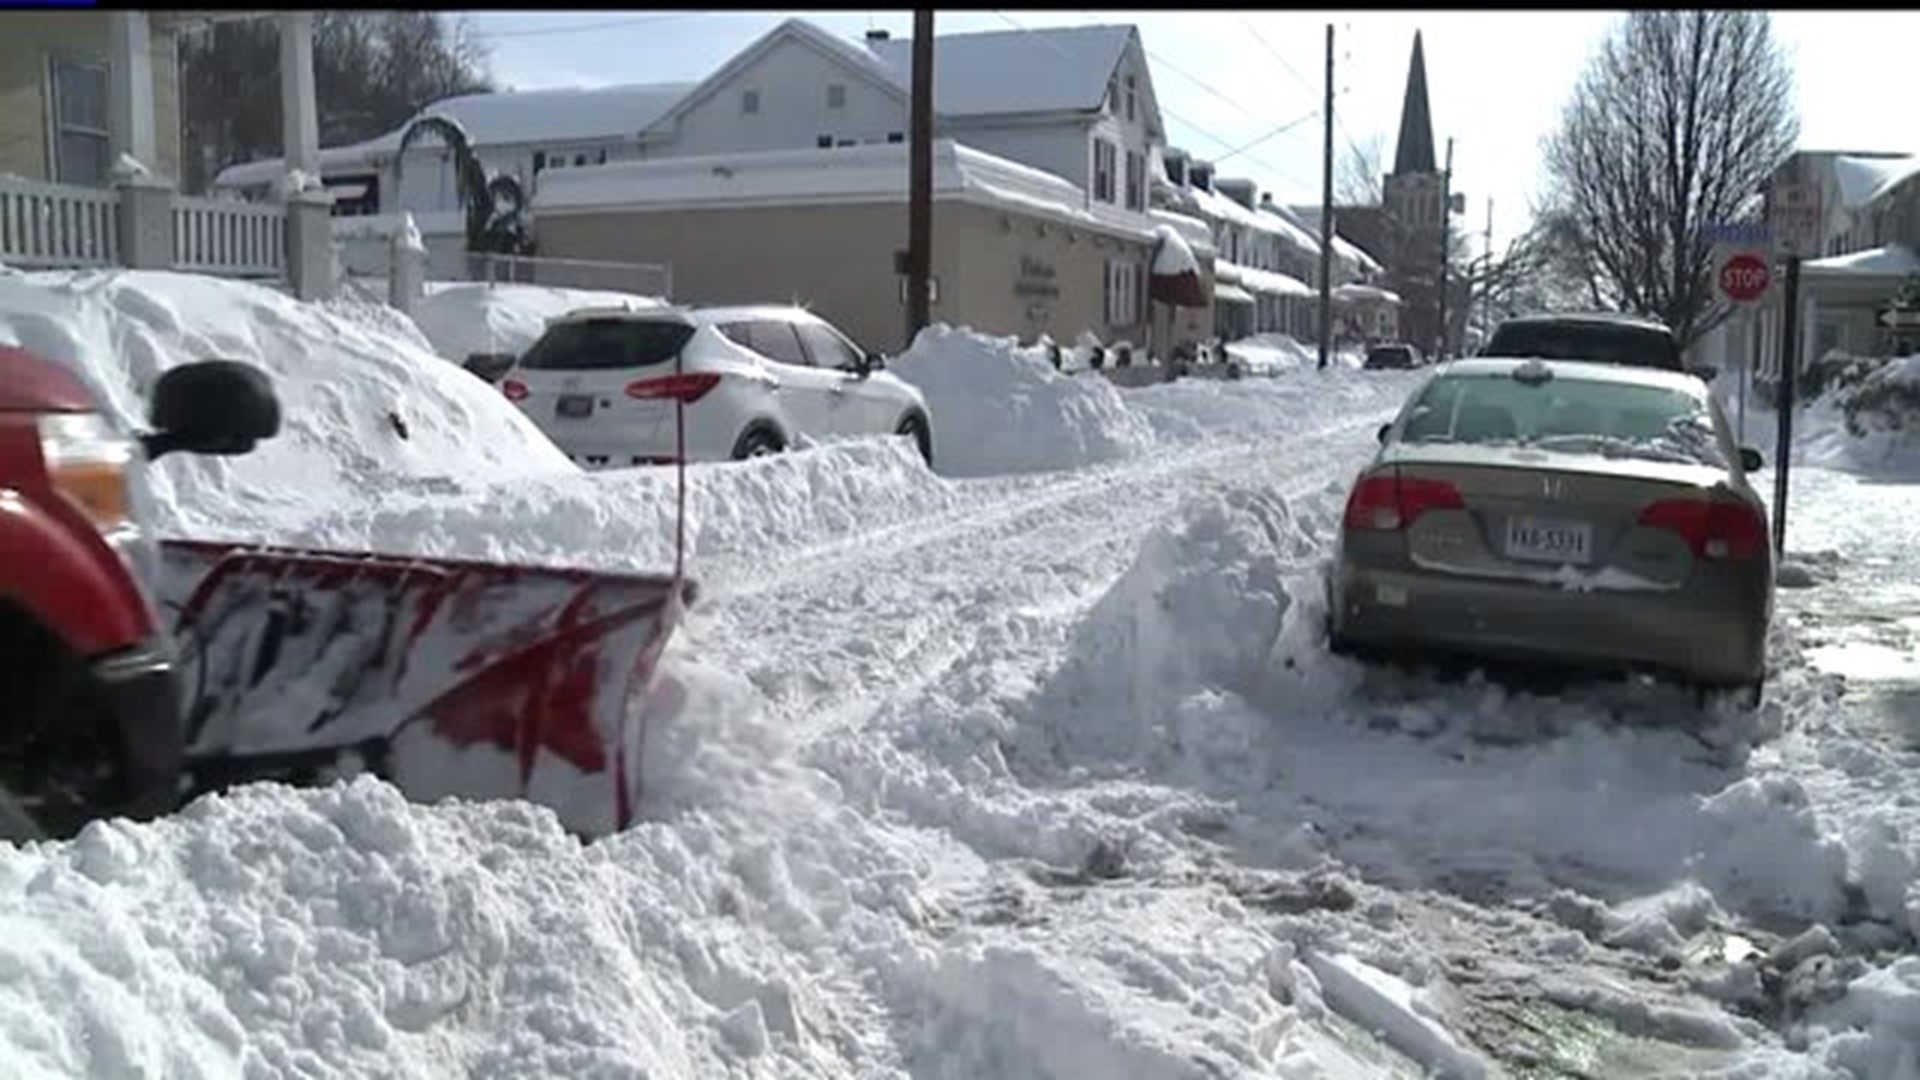 Steelton like "a war zone" after snow storm as cleanup awaits